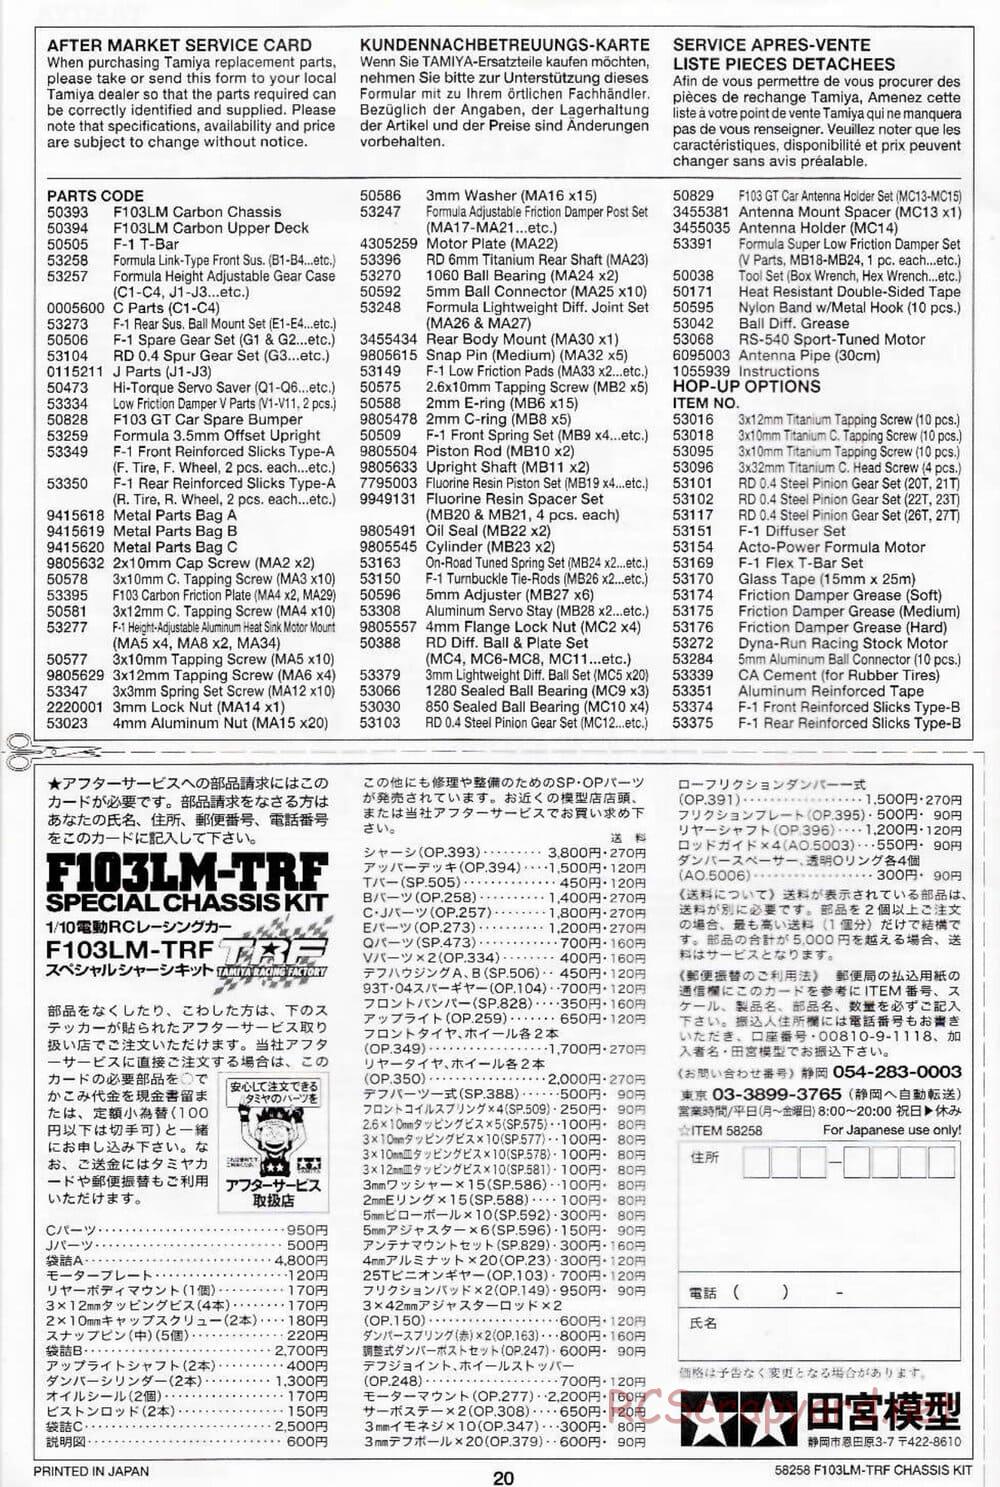 Tamiya - F103LM TRF Special Chassis - Manual - Page 20